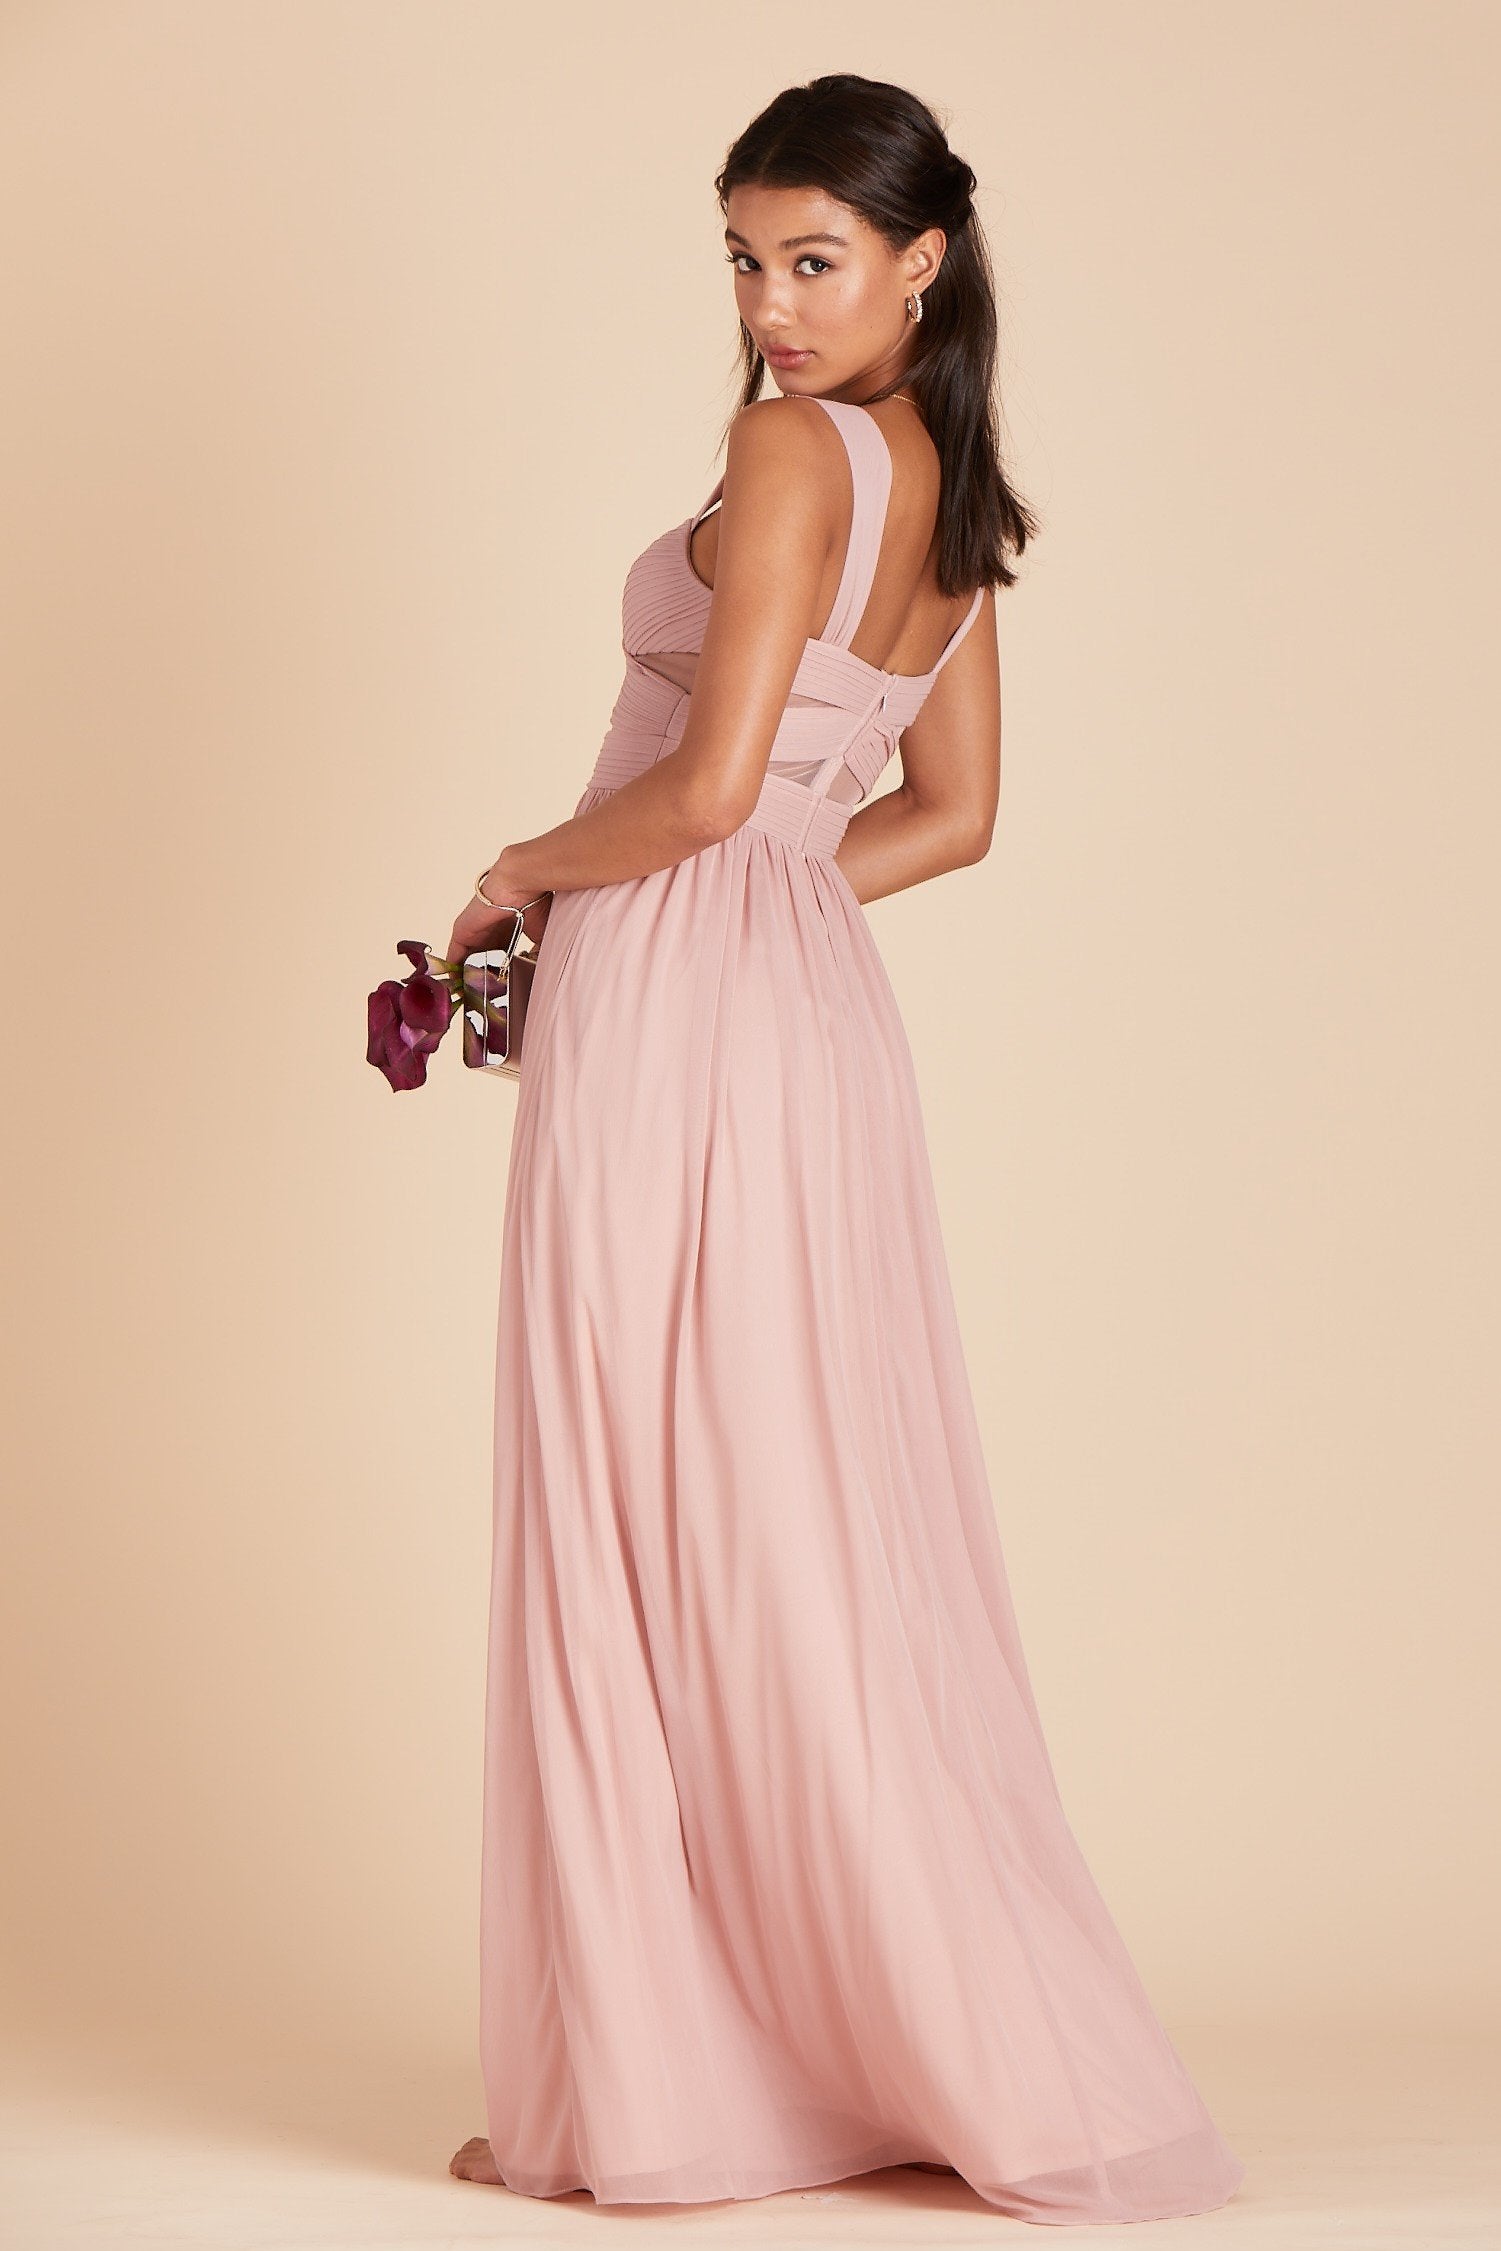 Side view of the Elsye Bridesmaid Dress in dusty rose mesh worn by a slender model with a medium skin tone.